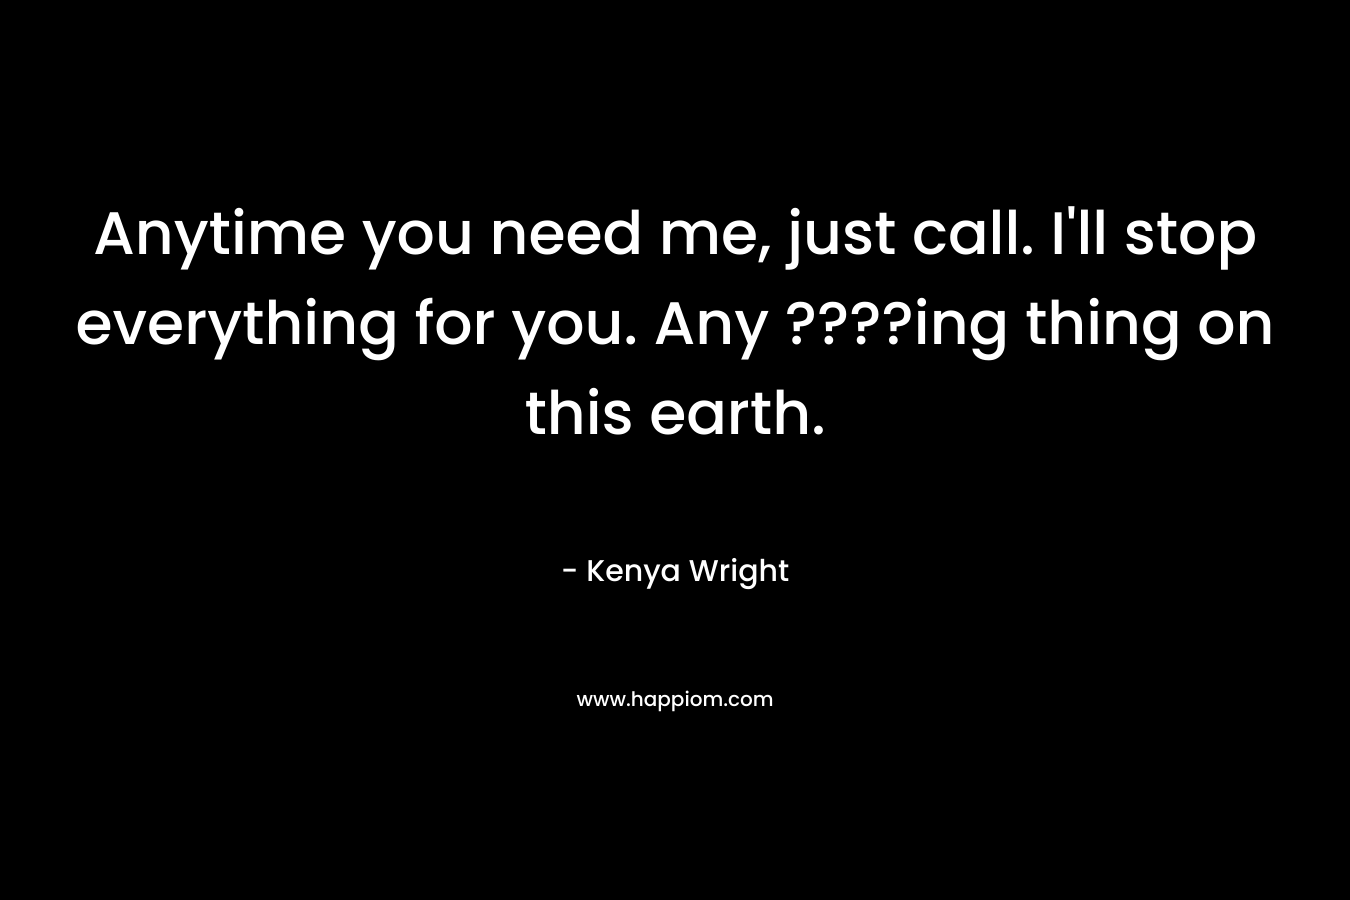 Anytime you need me, just call. I'll stop everything for you. Any ????ing thing on this earth.